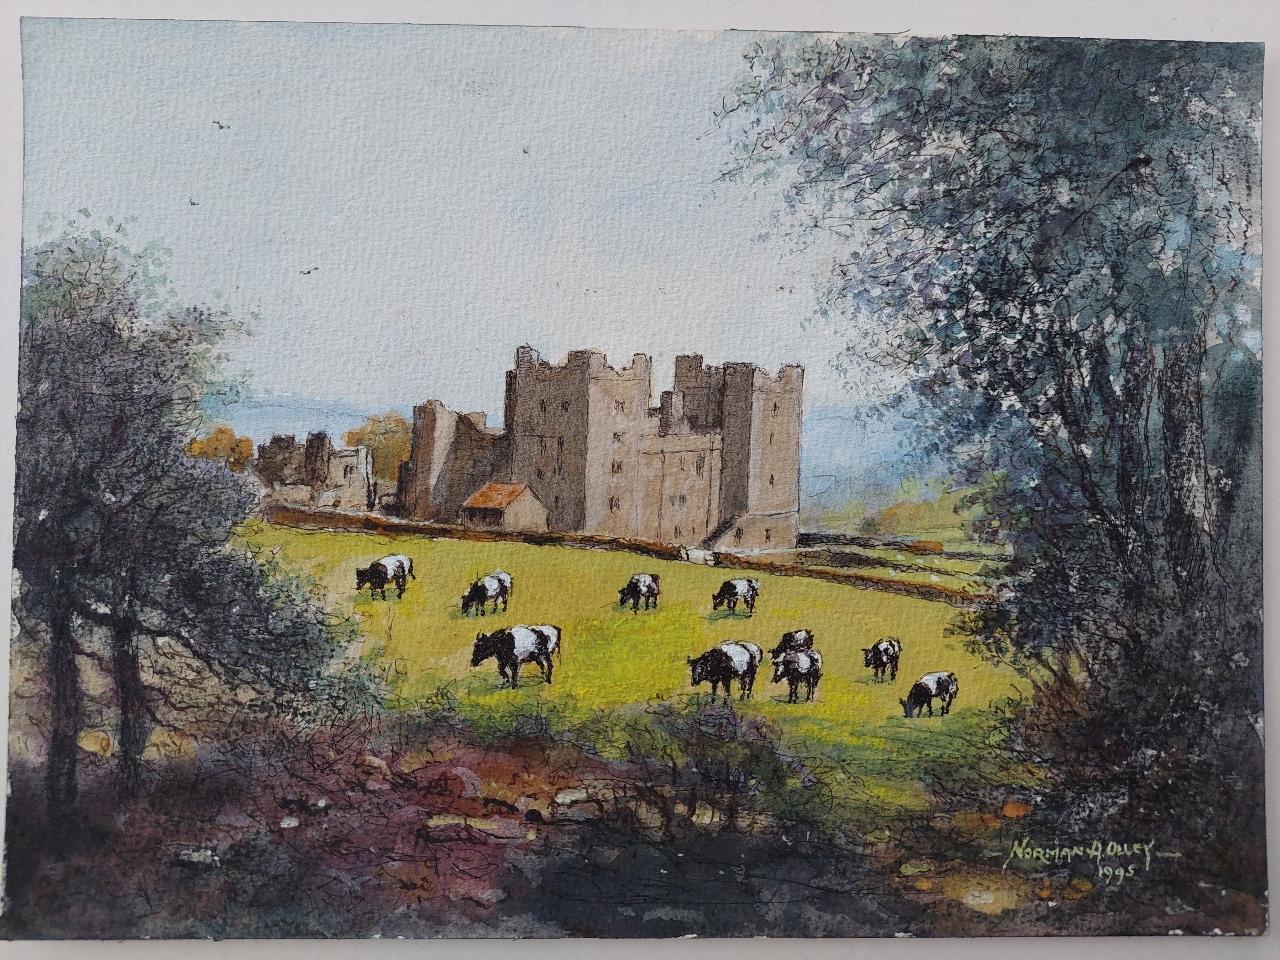 Artist/ School: Norman A. Olley ( British, 20th Century, 1908-1996), 1995, signed to the front and inscribed verso

Title - Bolton Castle, Yorkshire, England. Cattle grazing the fields below the 14th Century medieval Bolton Castle, with birds